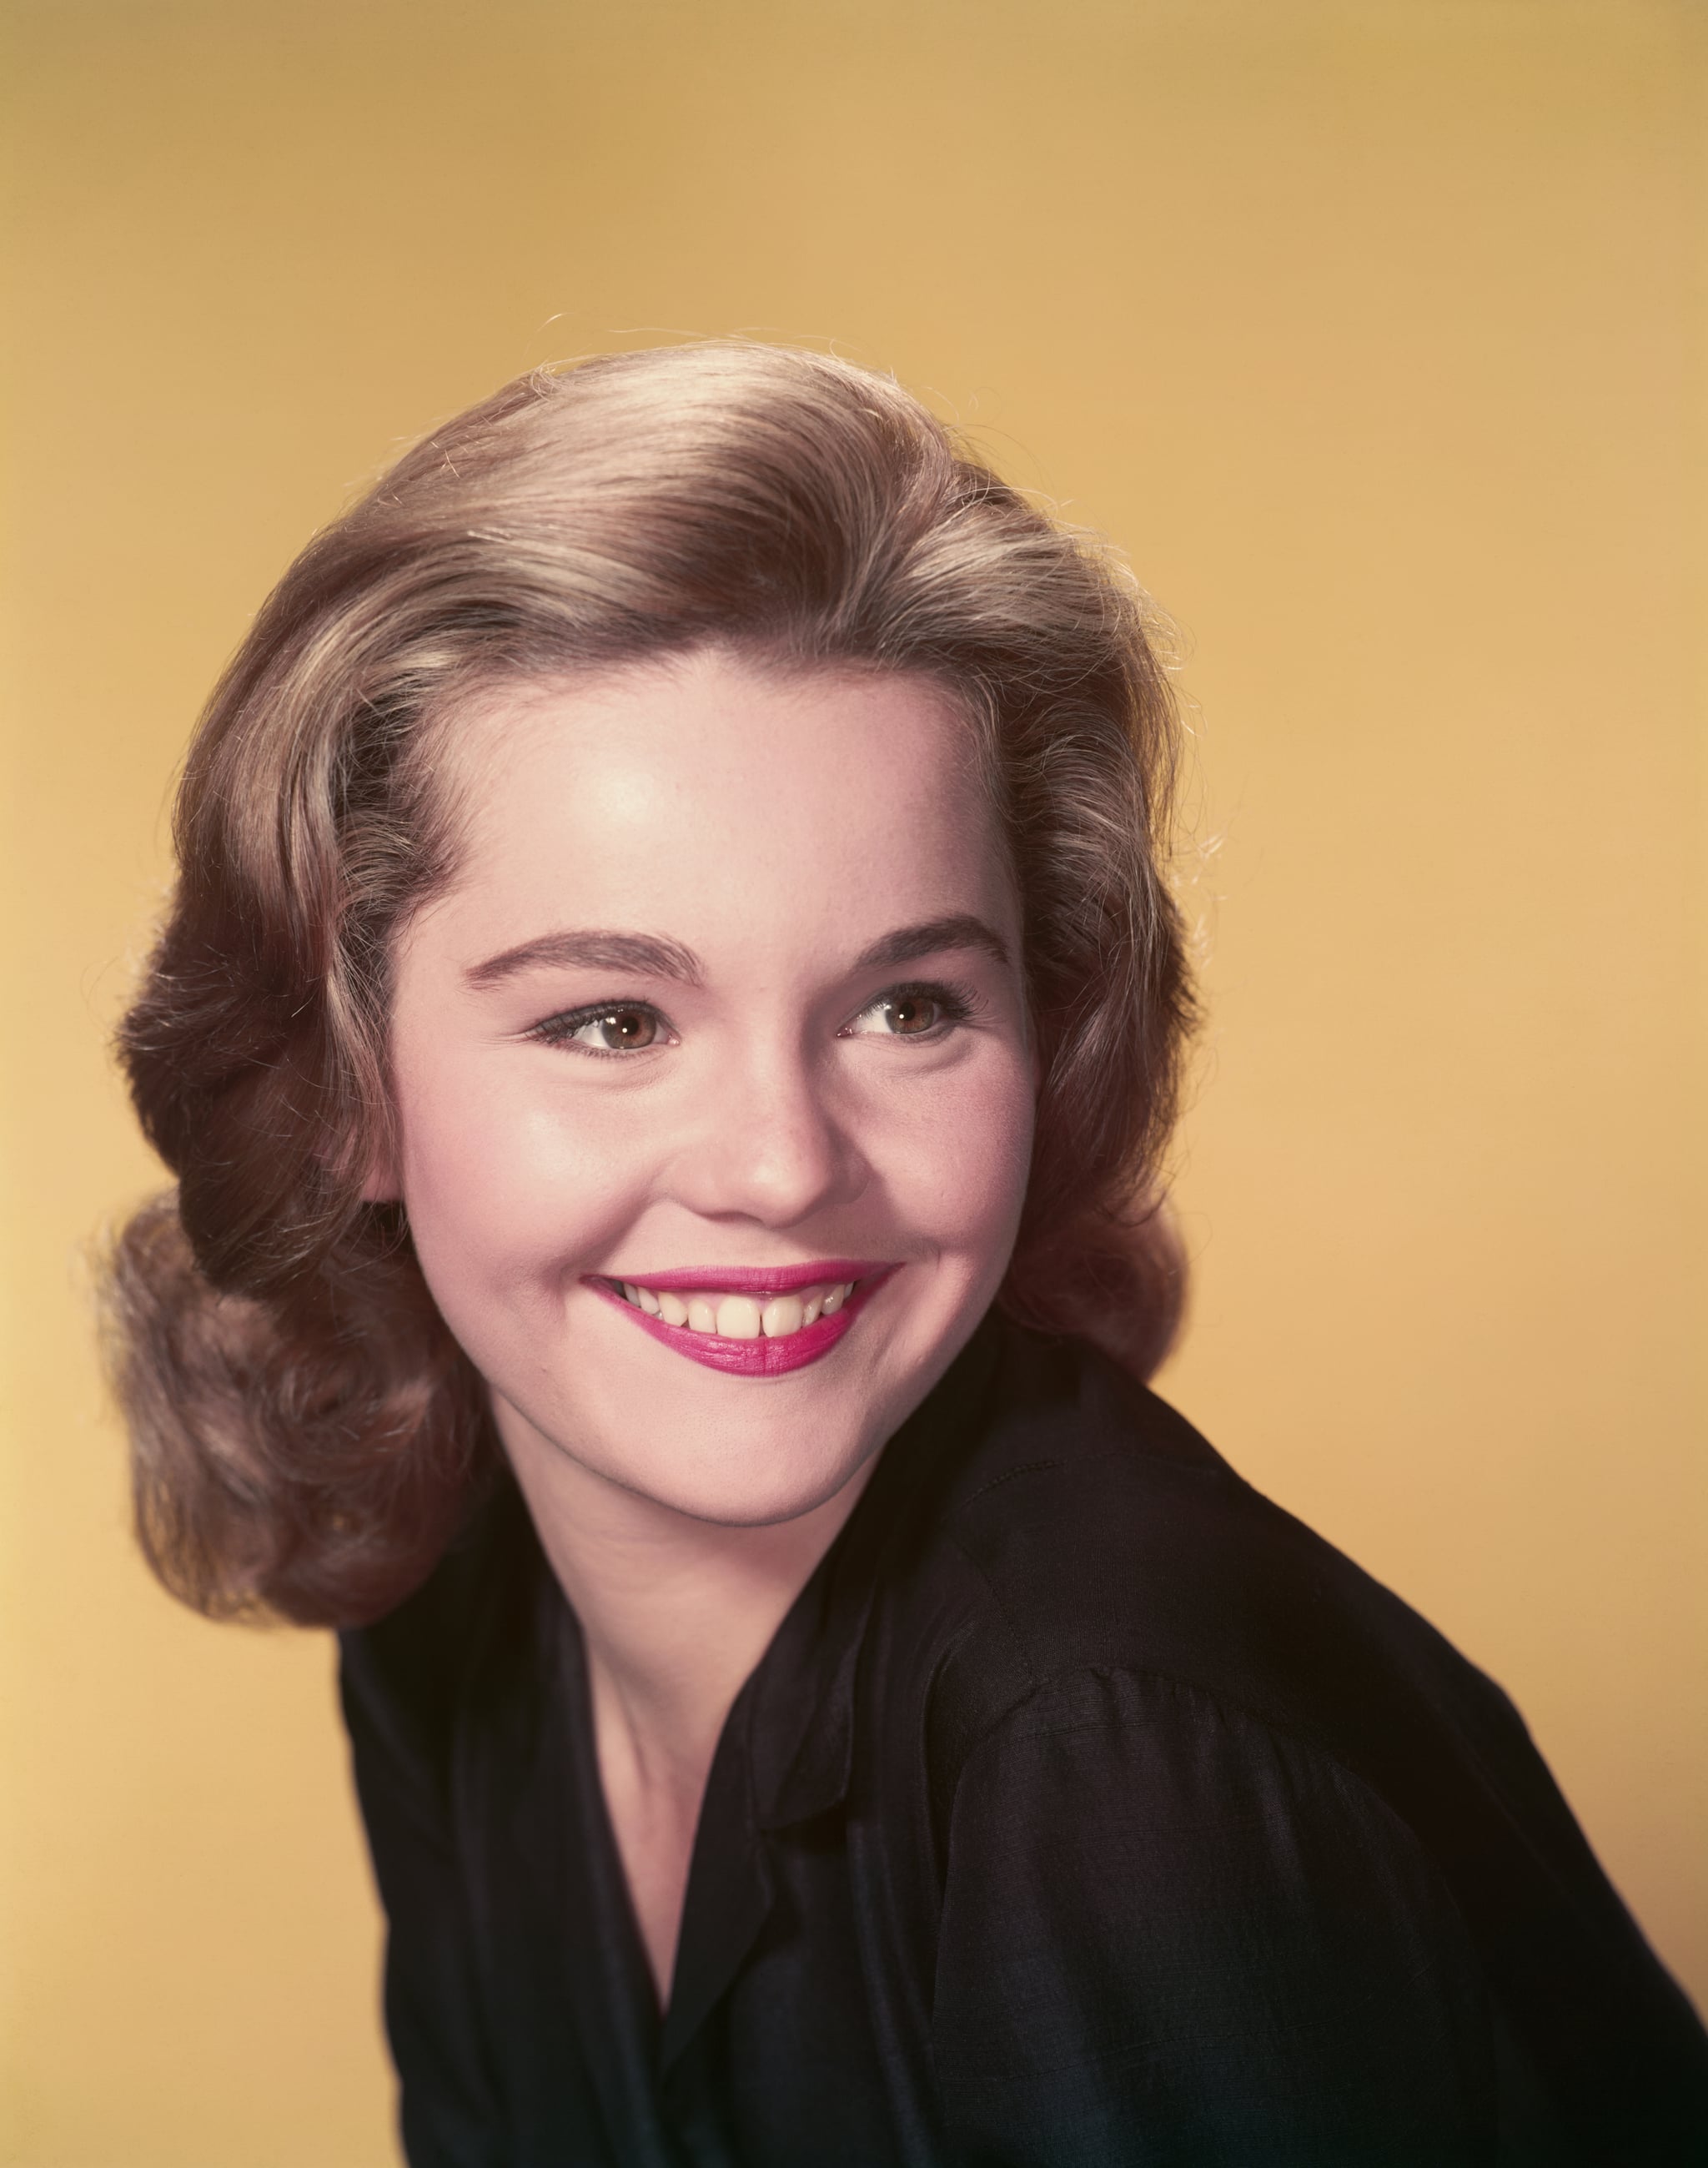 Tuesday Weld  The Golden Globes Have Nominated More Kids Than You